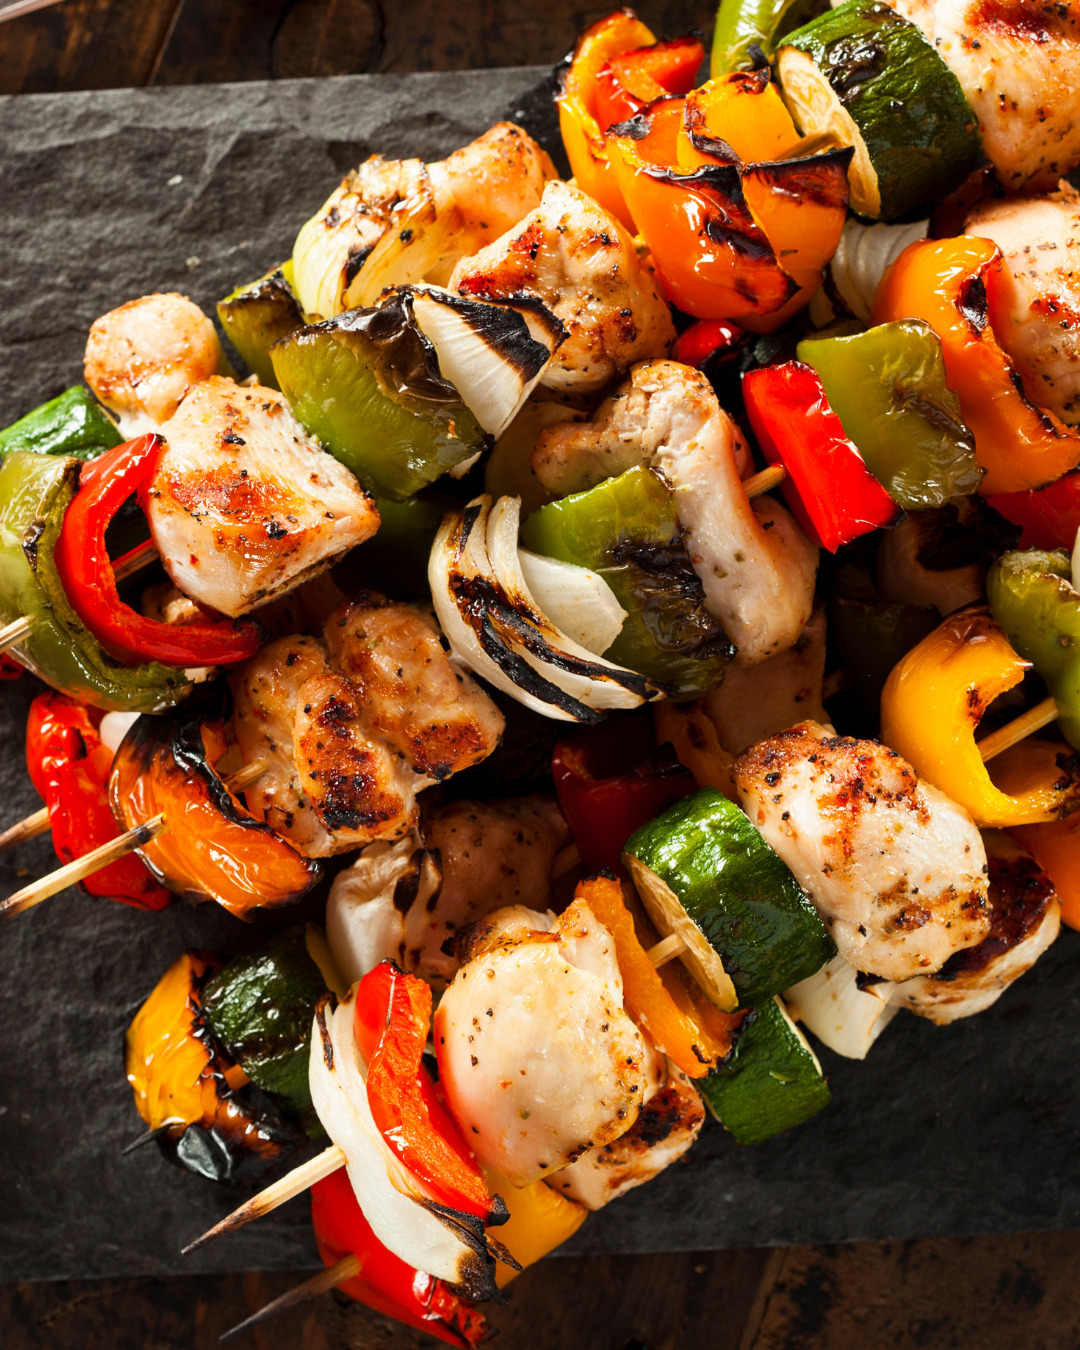 Our Favorite Skewer Recipes - Women of Today